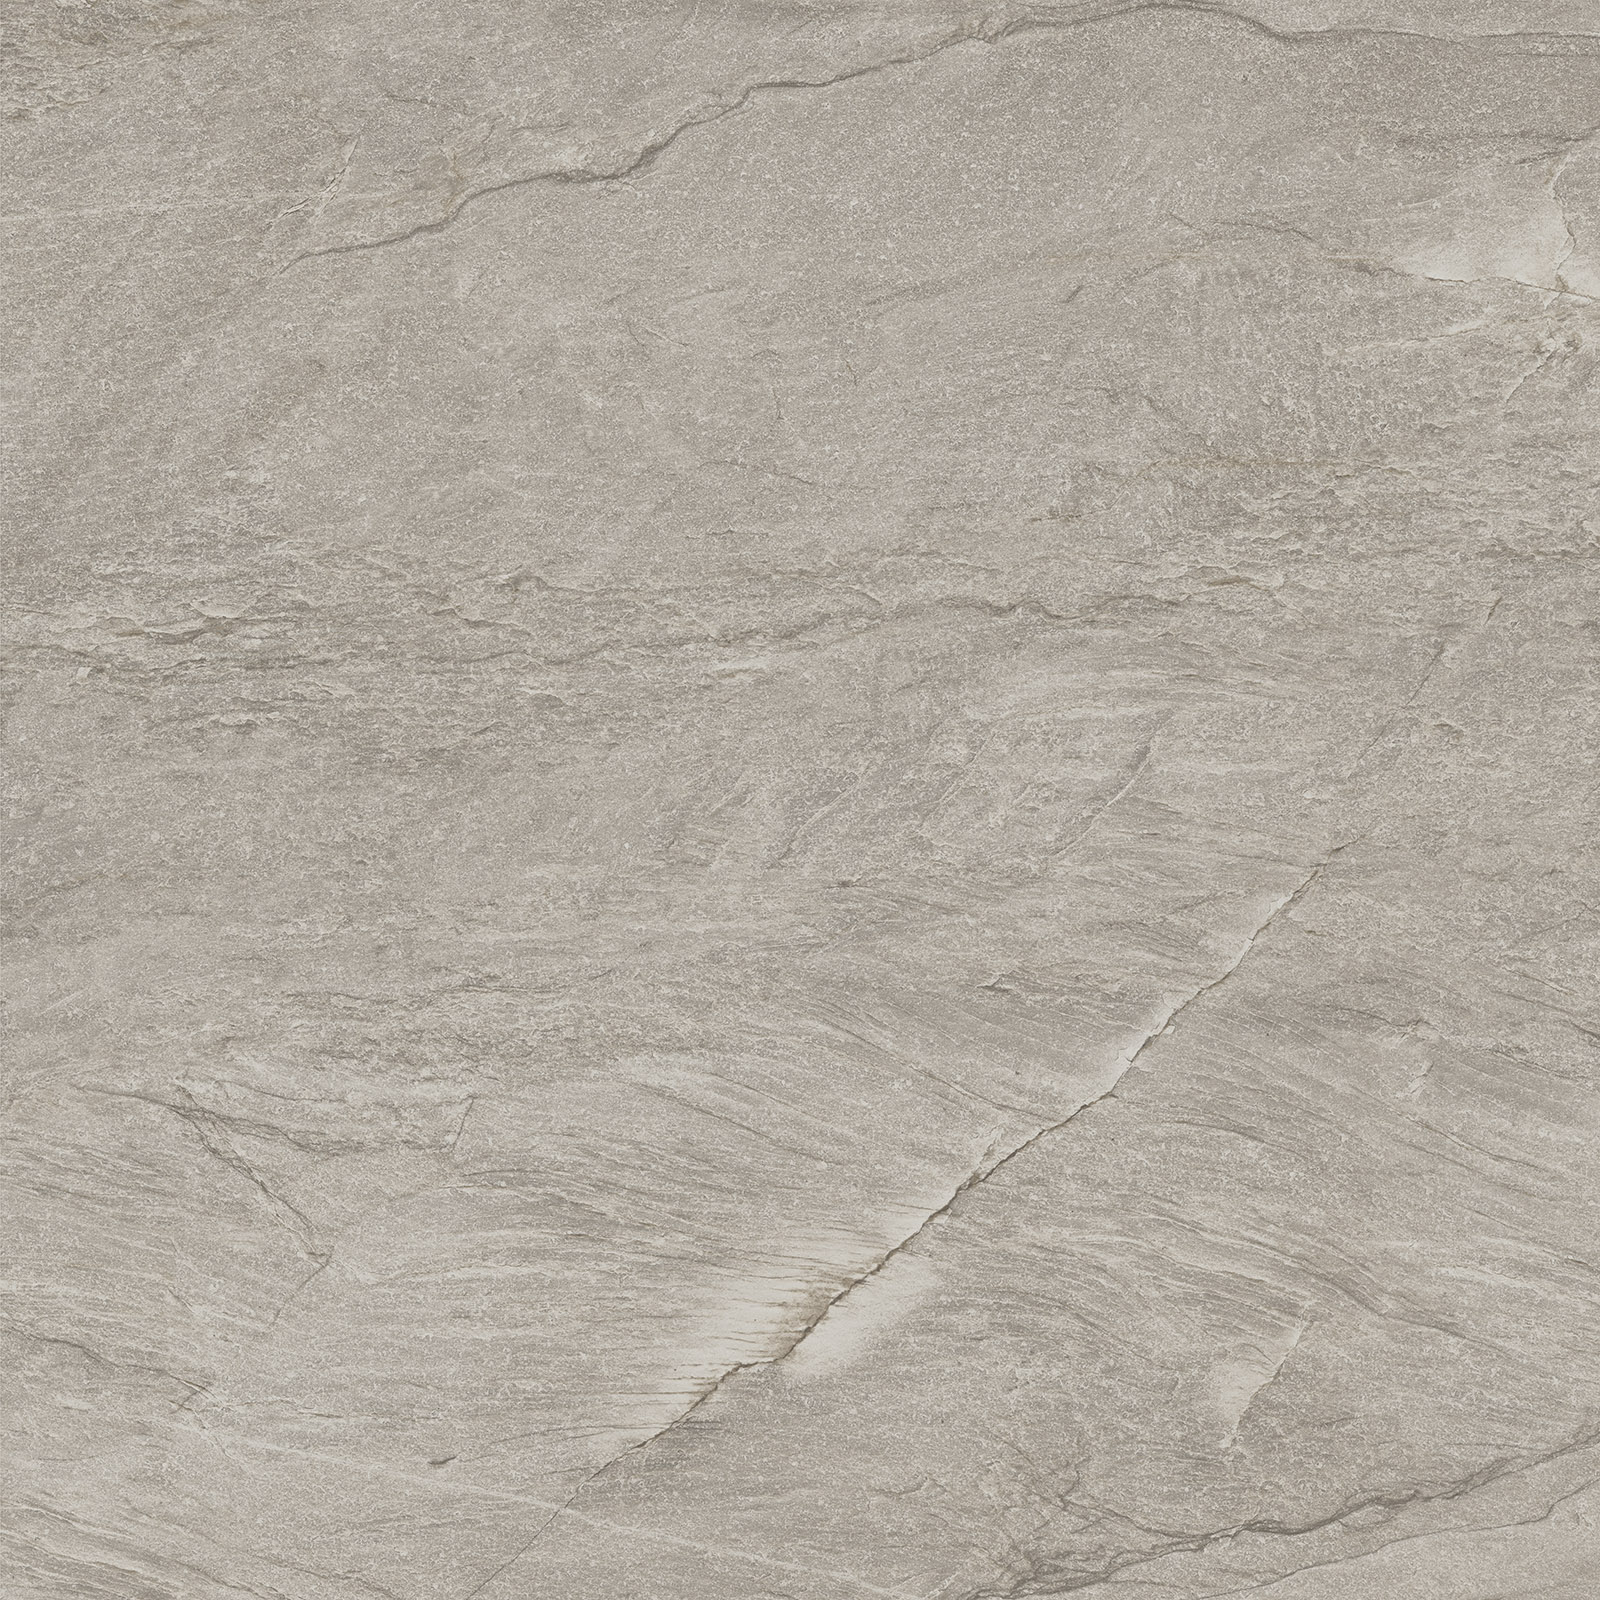 Imola Vibes Beige Scuro Natural Strutturato Matt 179571 120x120cm rectified 10mm - VIBES 120BS RM